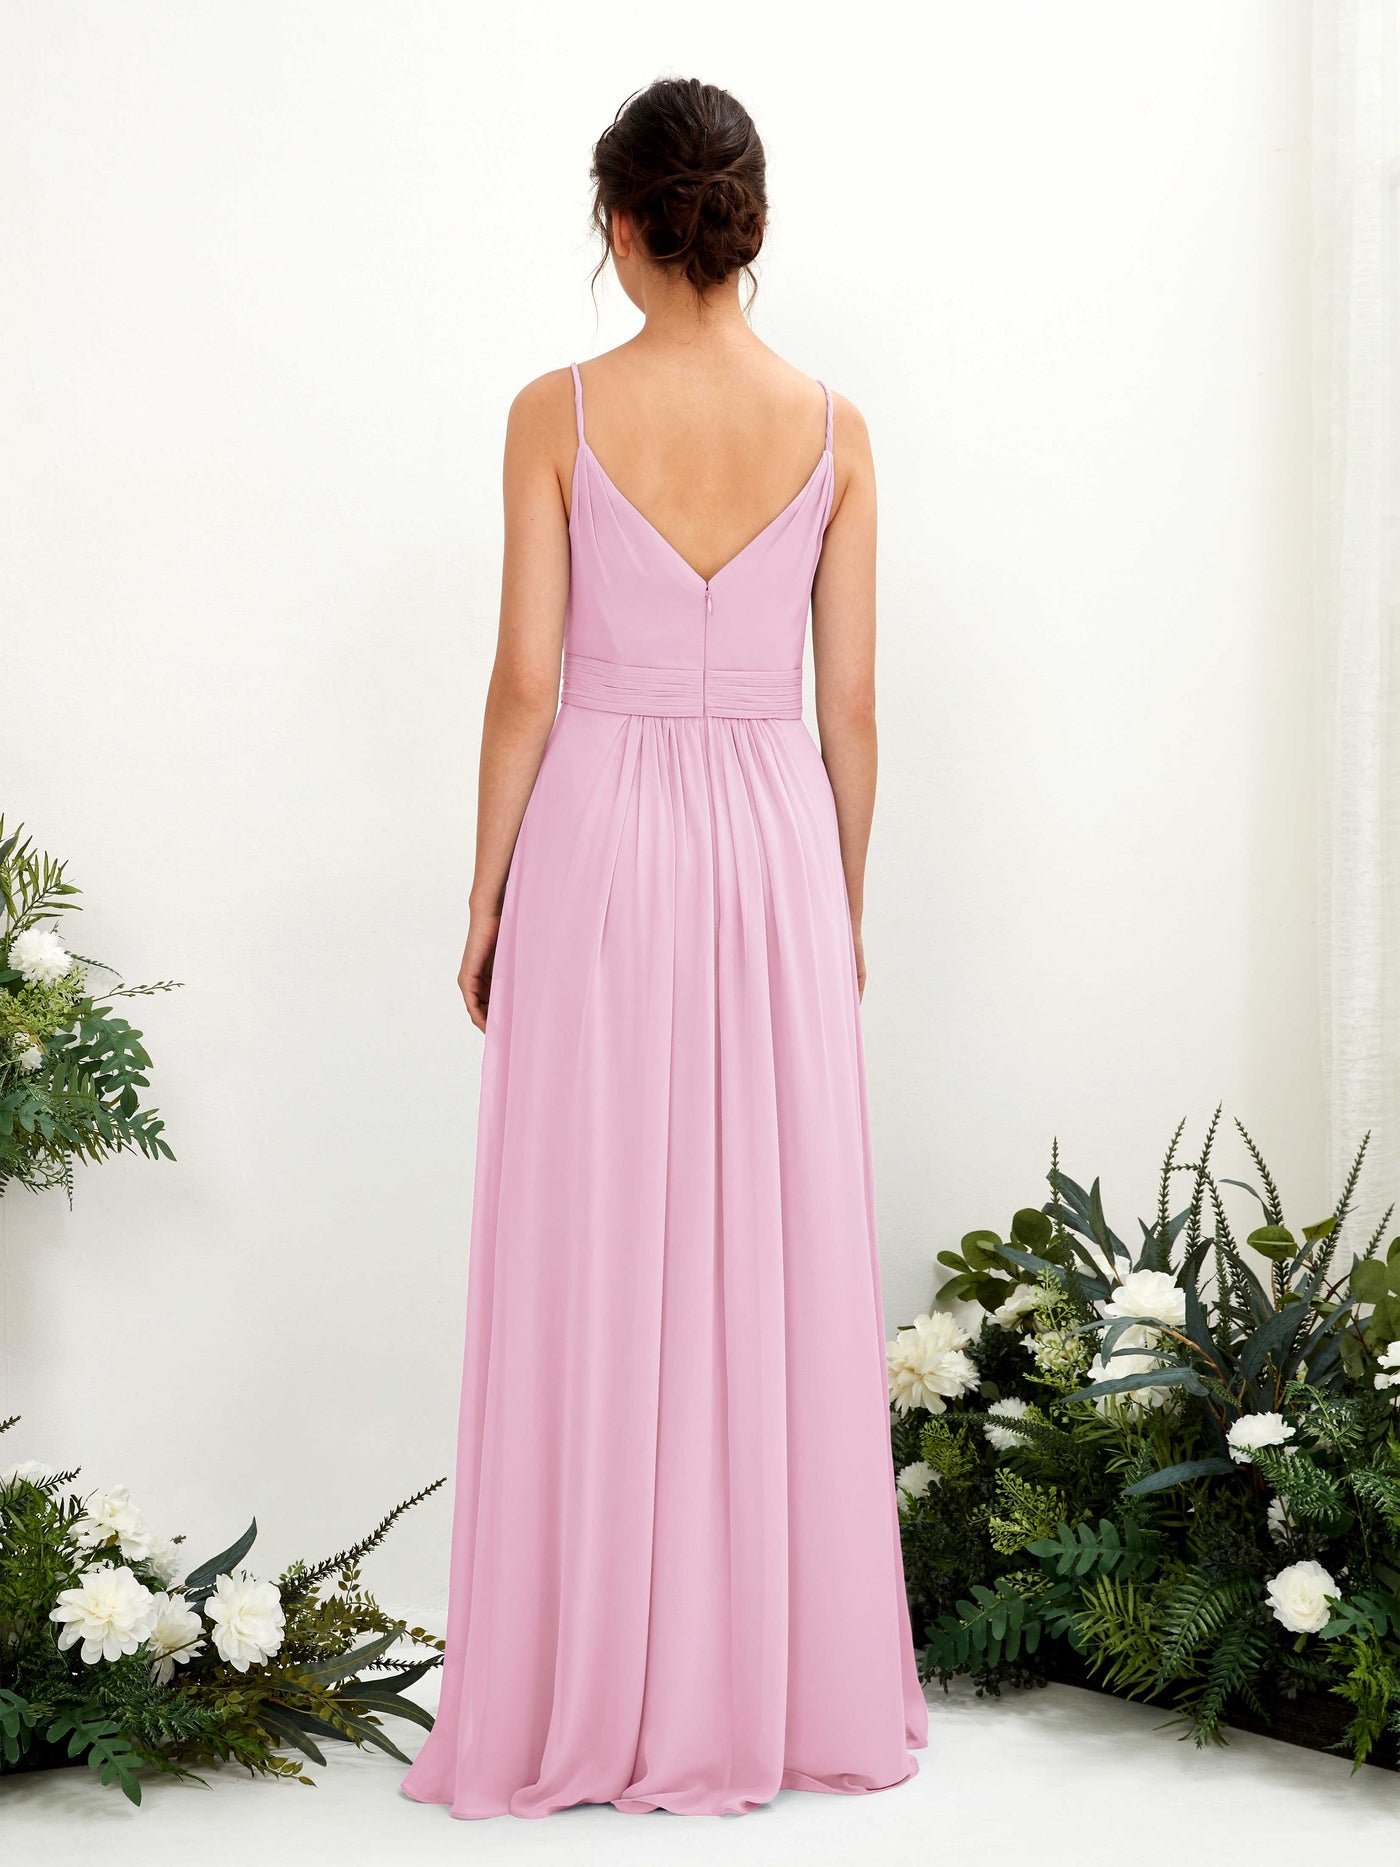 Candy Pink Bridesmaid Dresses Bridesmaid Dress A-line Chiffon Spaghetti-straps Full Length Sleeveless Wedding Party Dress (81223939)#color_candy-pink